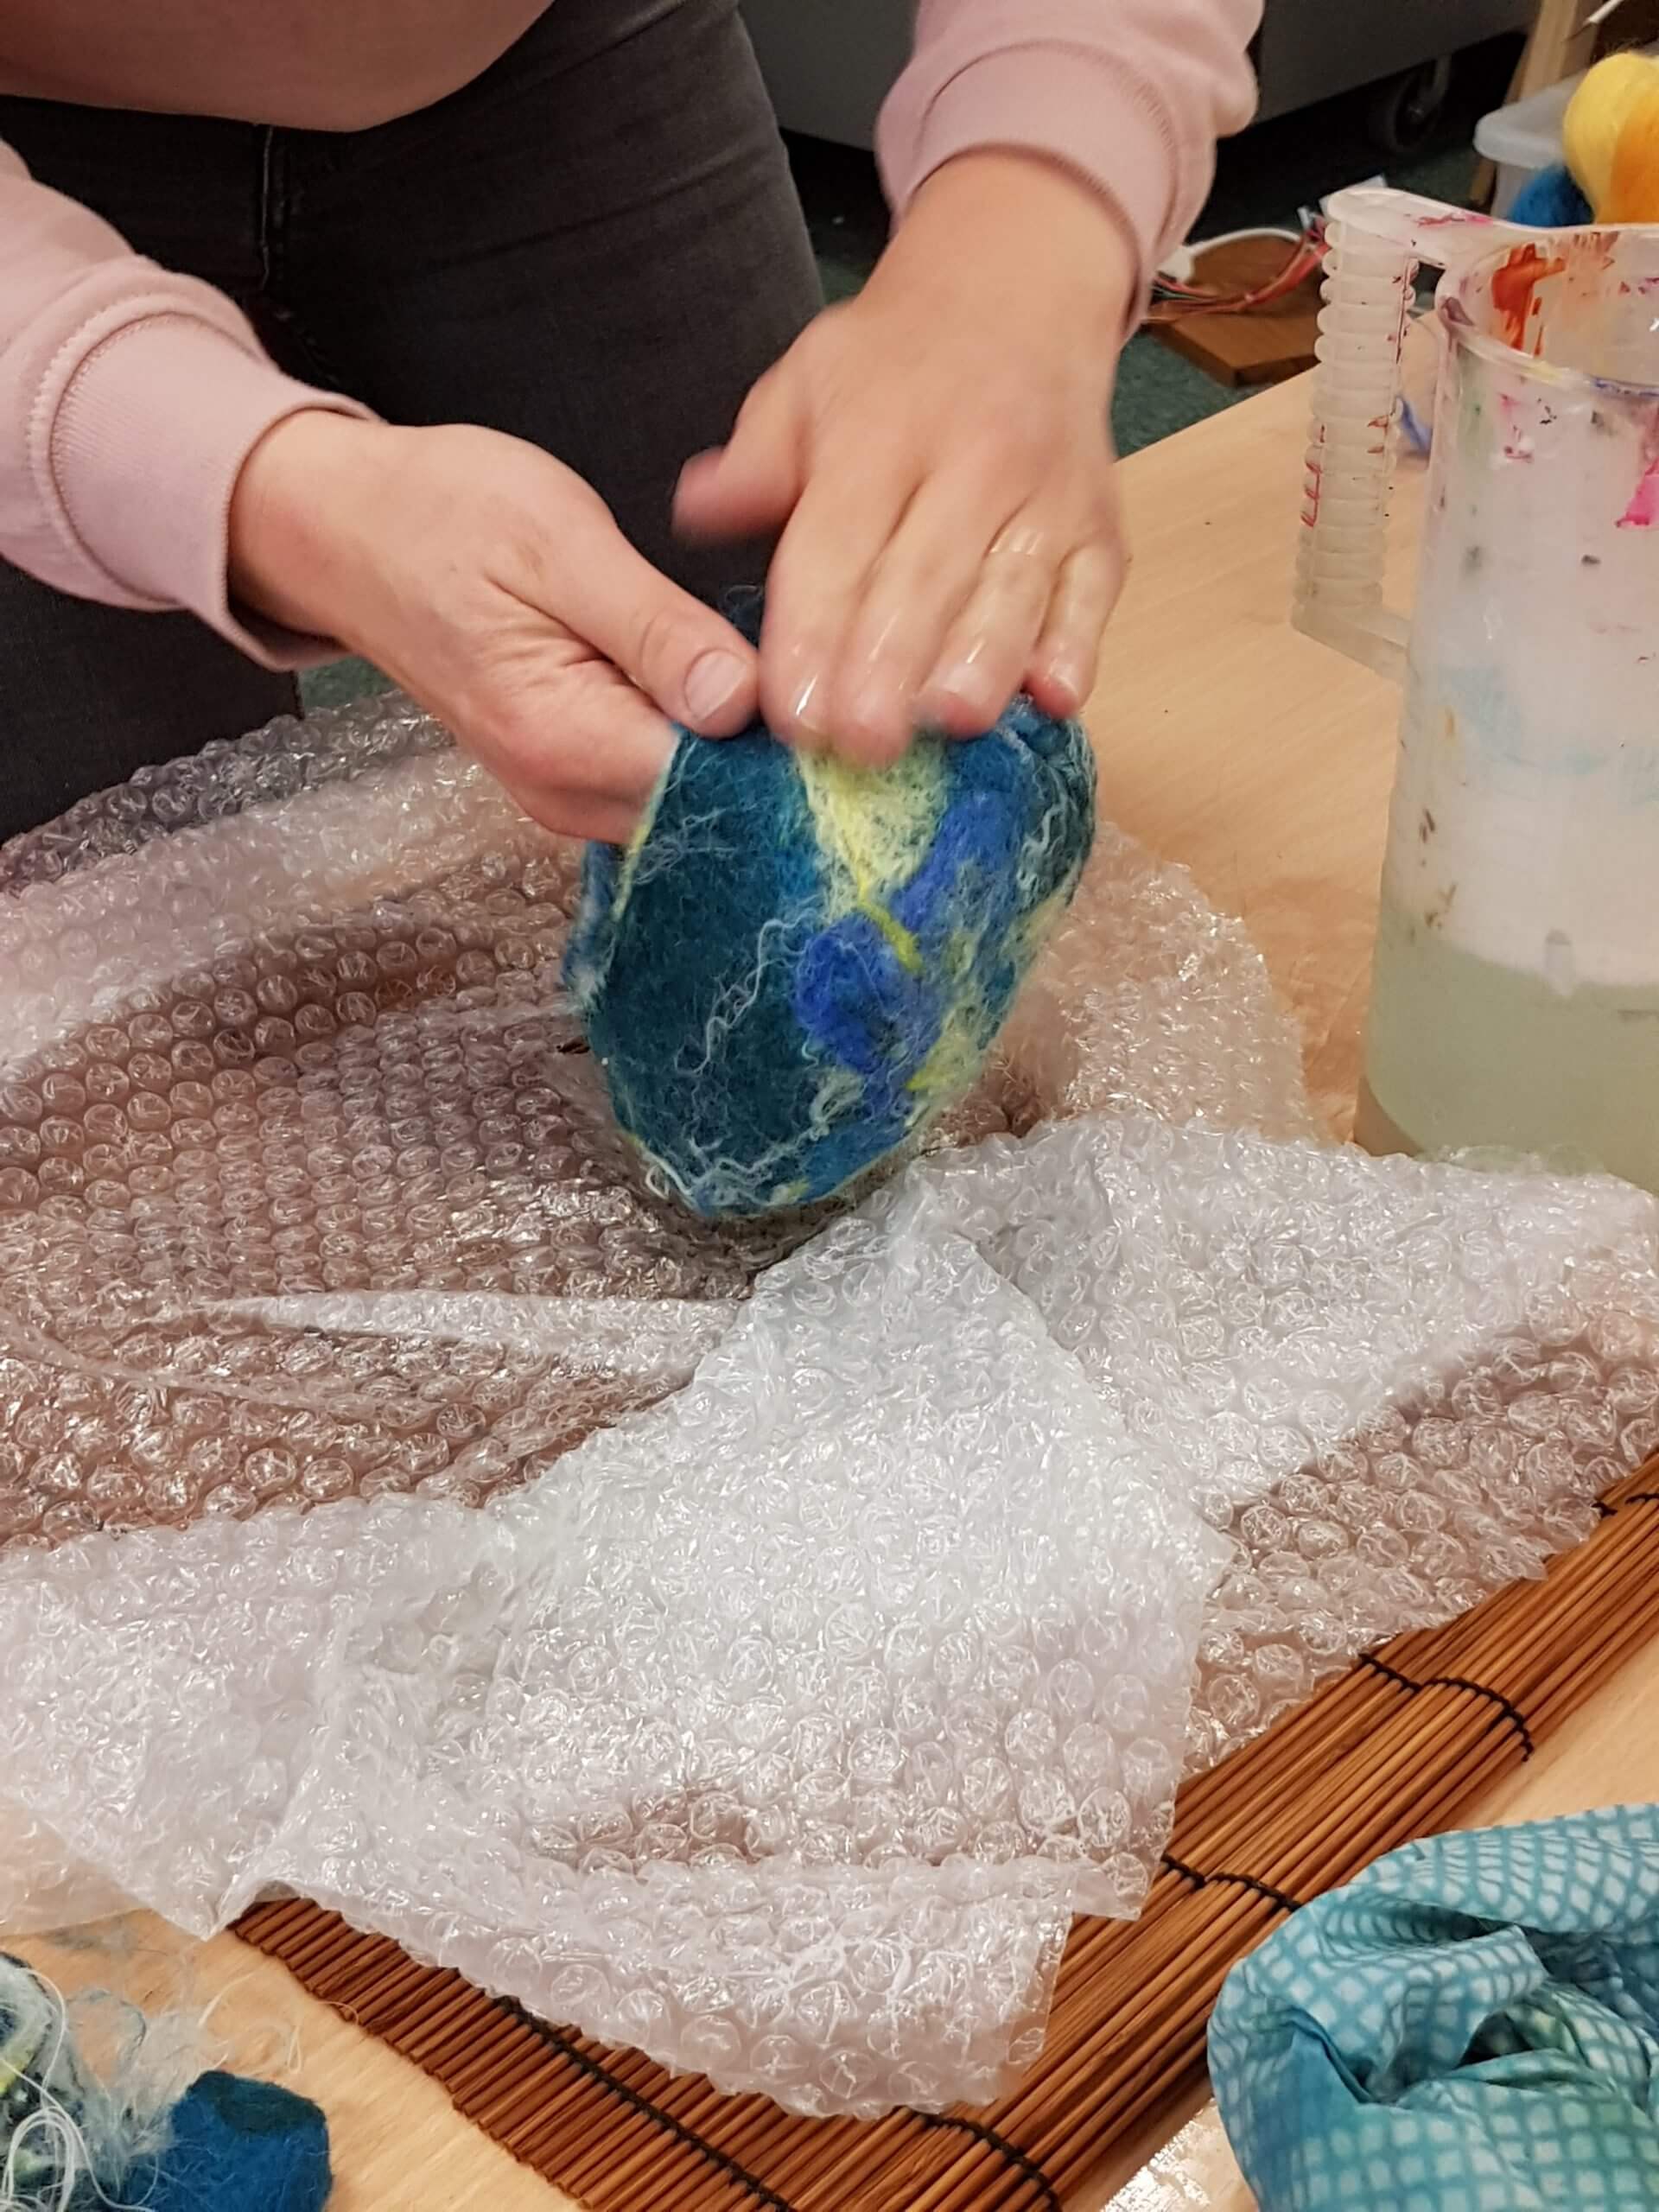 Making a hand-felted vessel on a workshop with Debbie Tomkies of DT Craft and Design